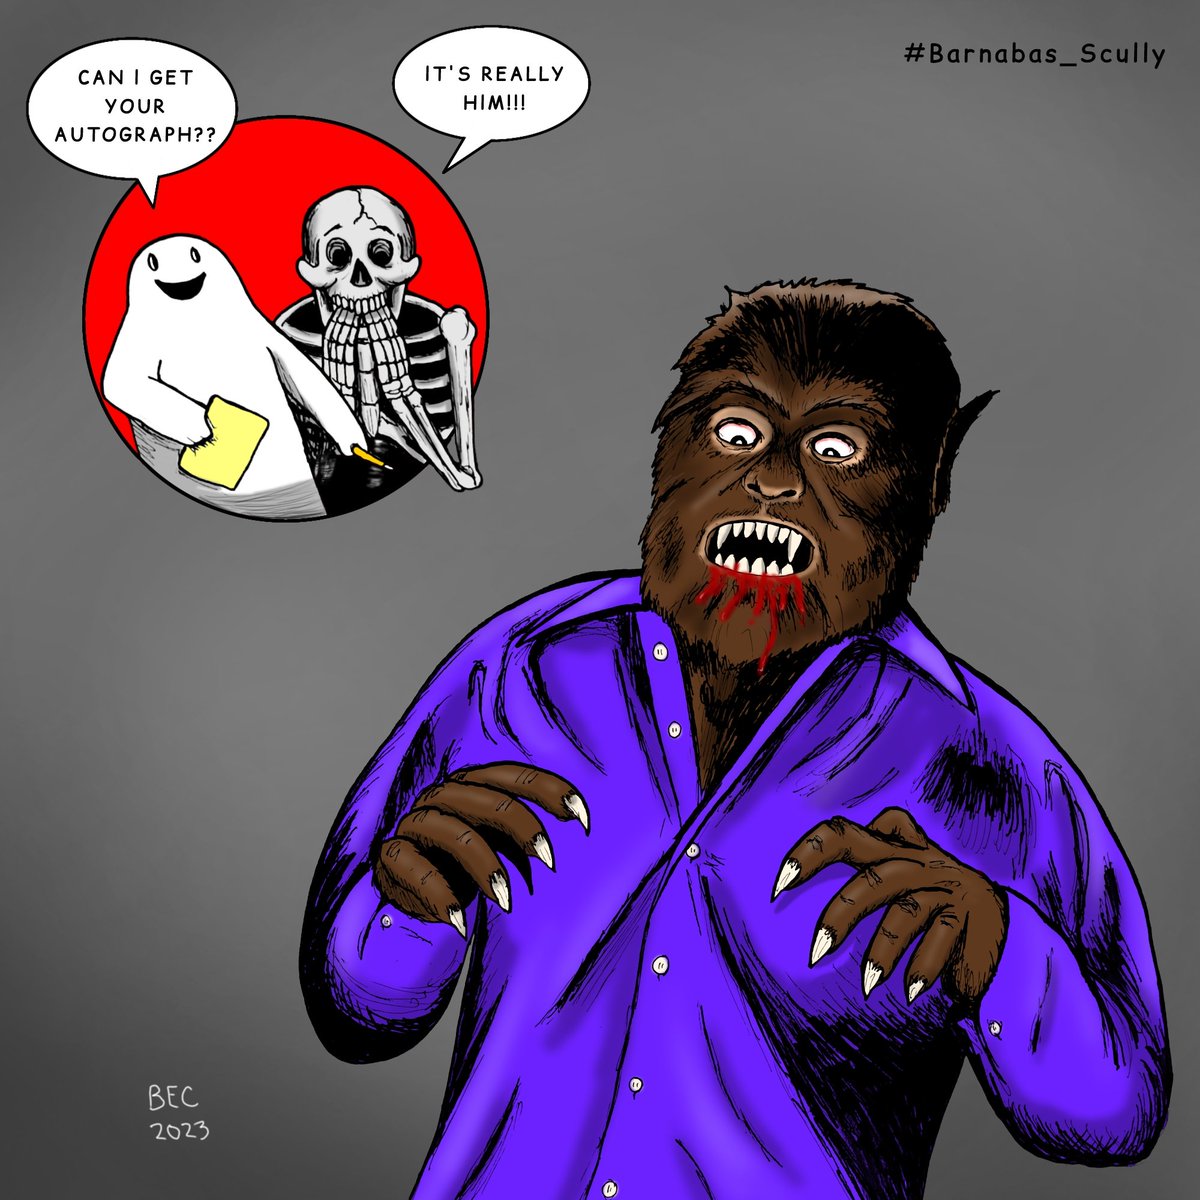 #Aughost Day 24 - Werewolf

Barnabas and Scully's favorite movie werewolf is el Hombre Lobo himself, legendary spanish actor, writer, director #PaulNaschy (#JacintoMolina), who played a wolf man over 15 times.

#AuGHOST2023
#Barnabas_Scully
#Haunted_collective
#kleineKunstklasse